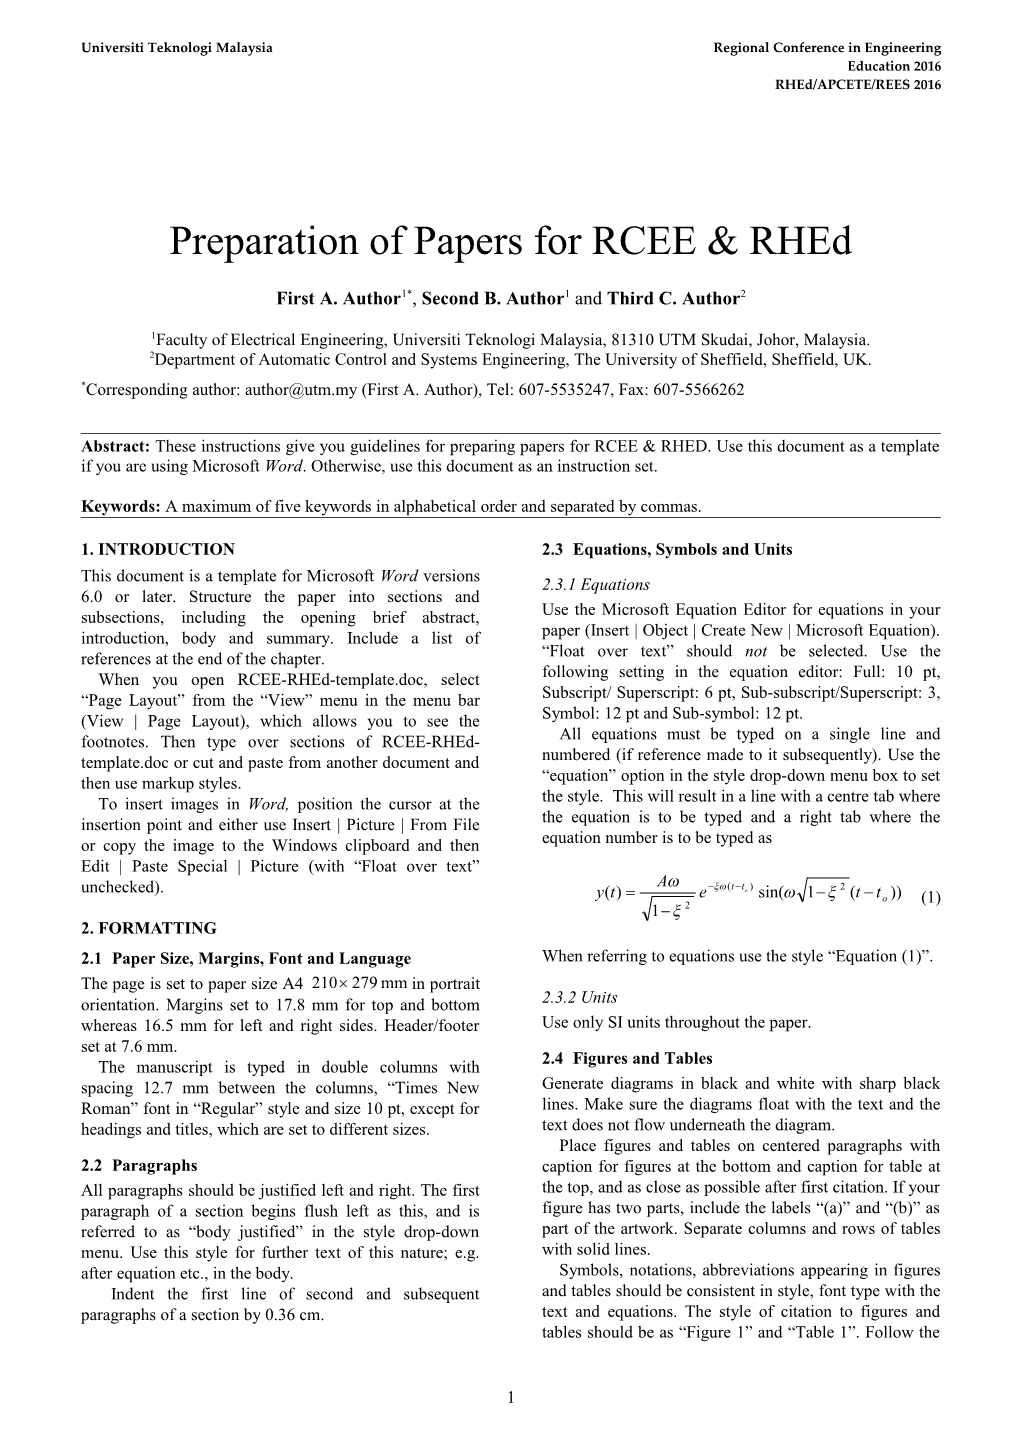 Preparation of Papers for ELEKTRIKA